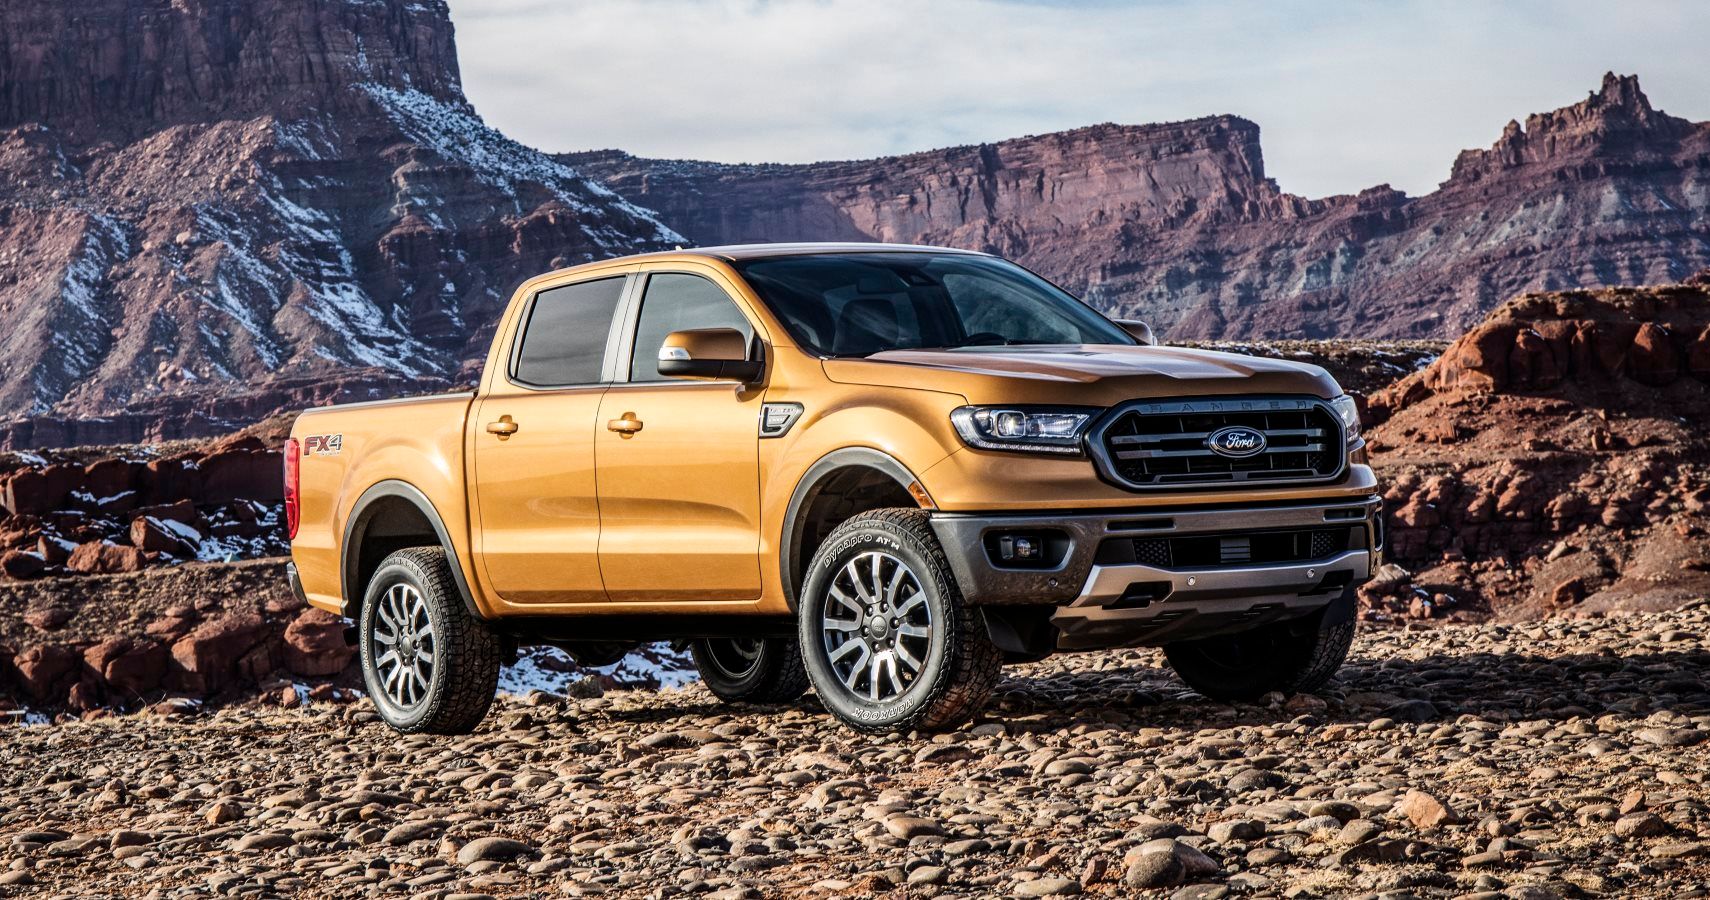 2019 Ford Ranger Already Recalled After Being On Sale For A Month